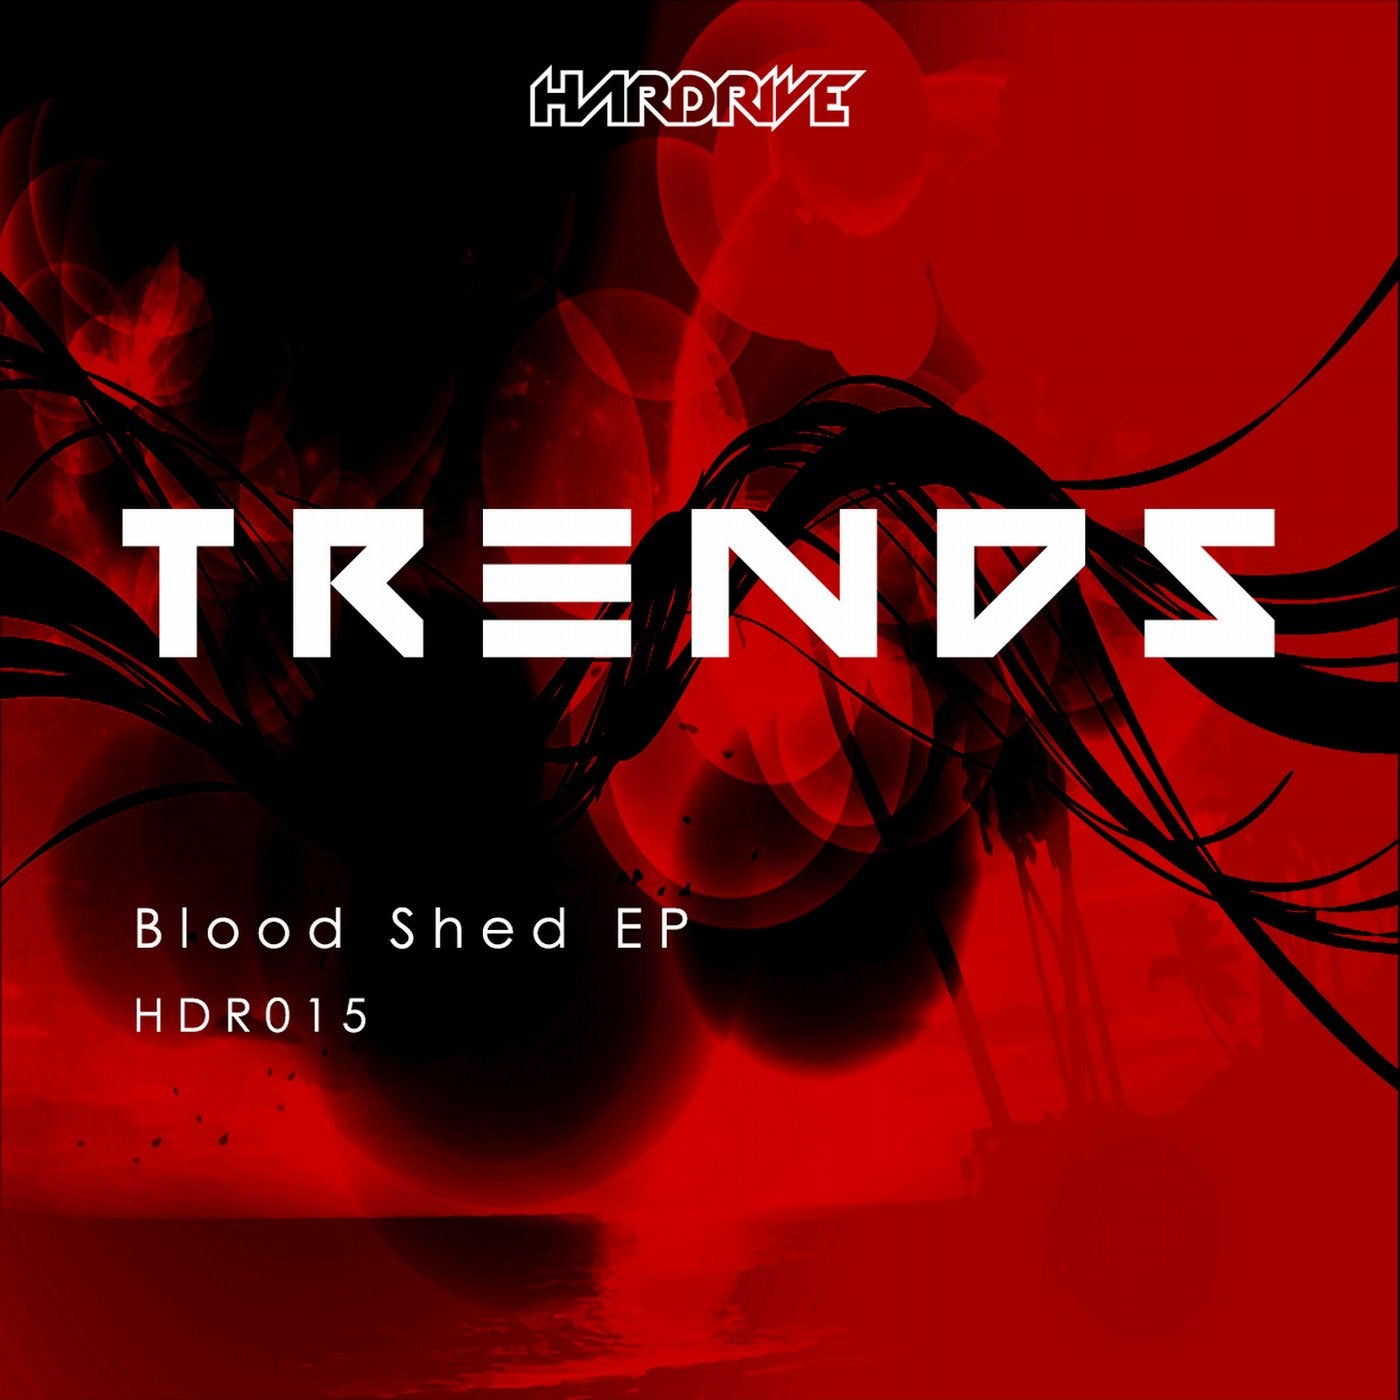 Blood Shed EP